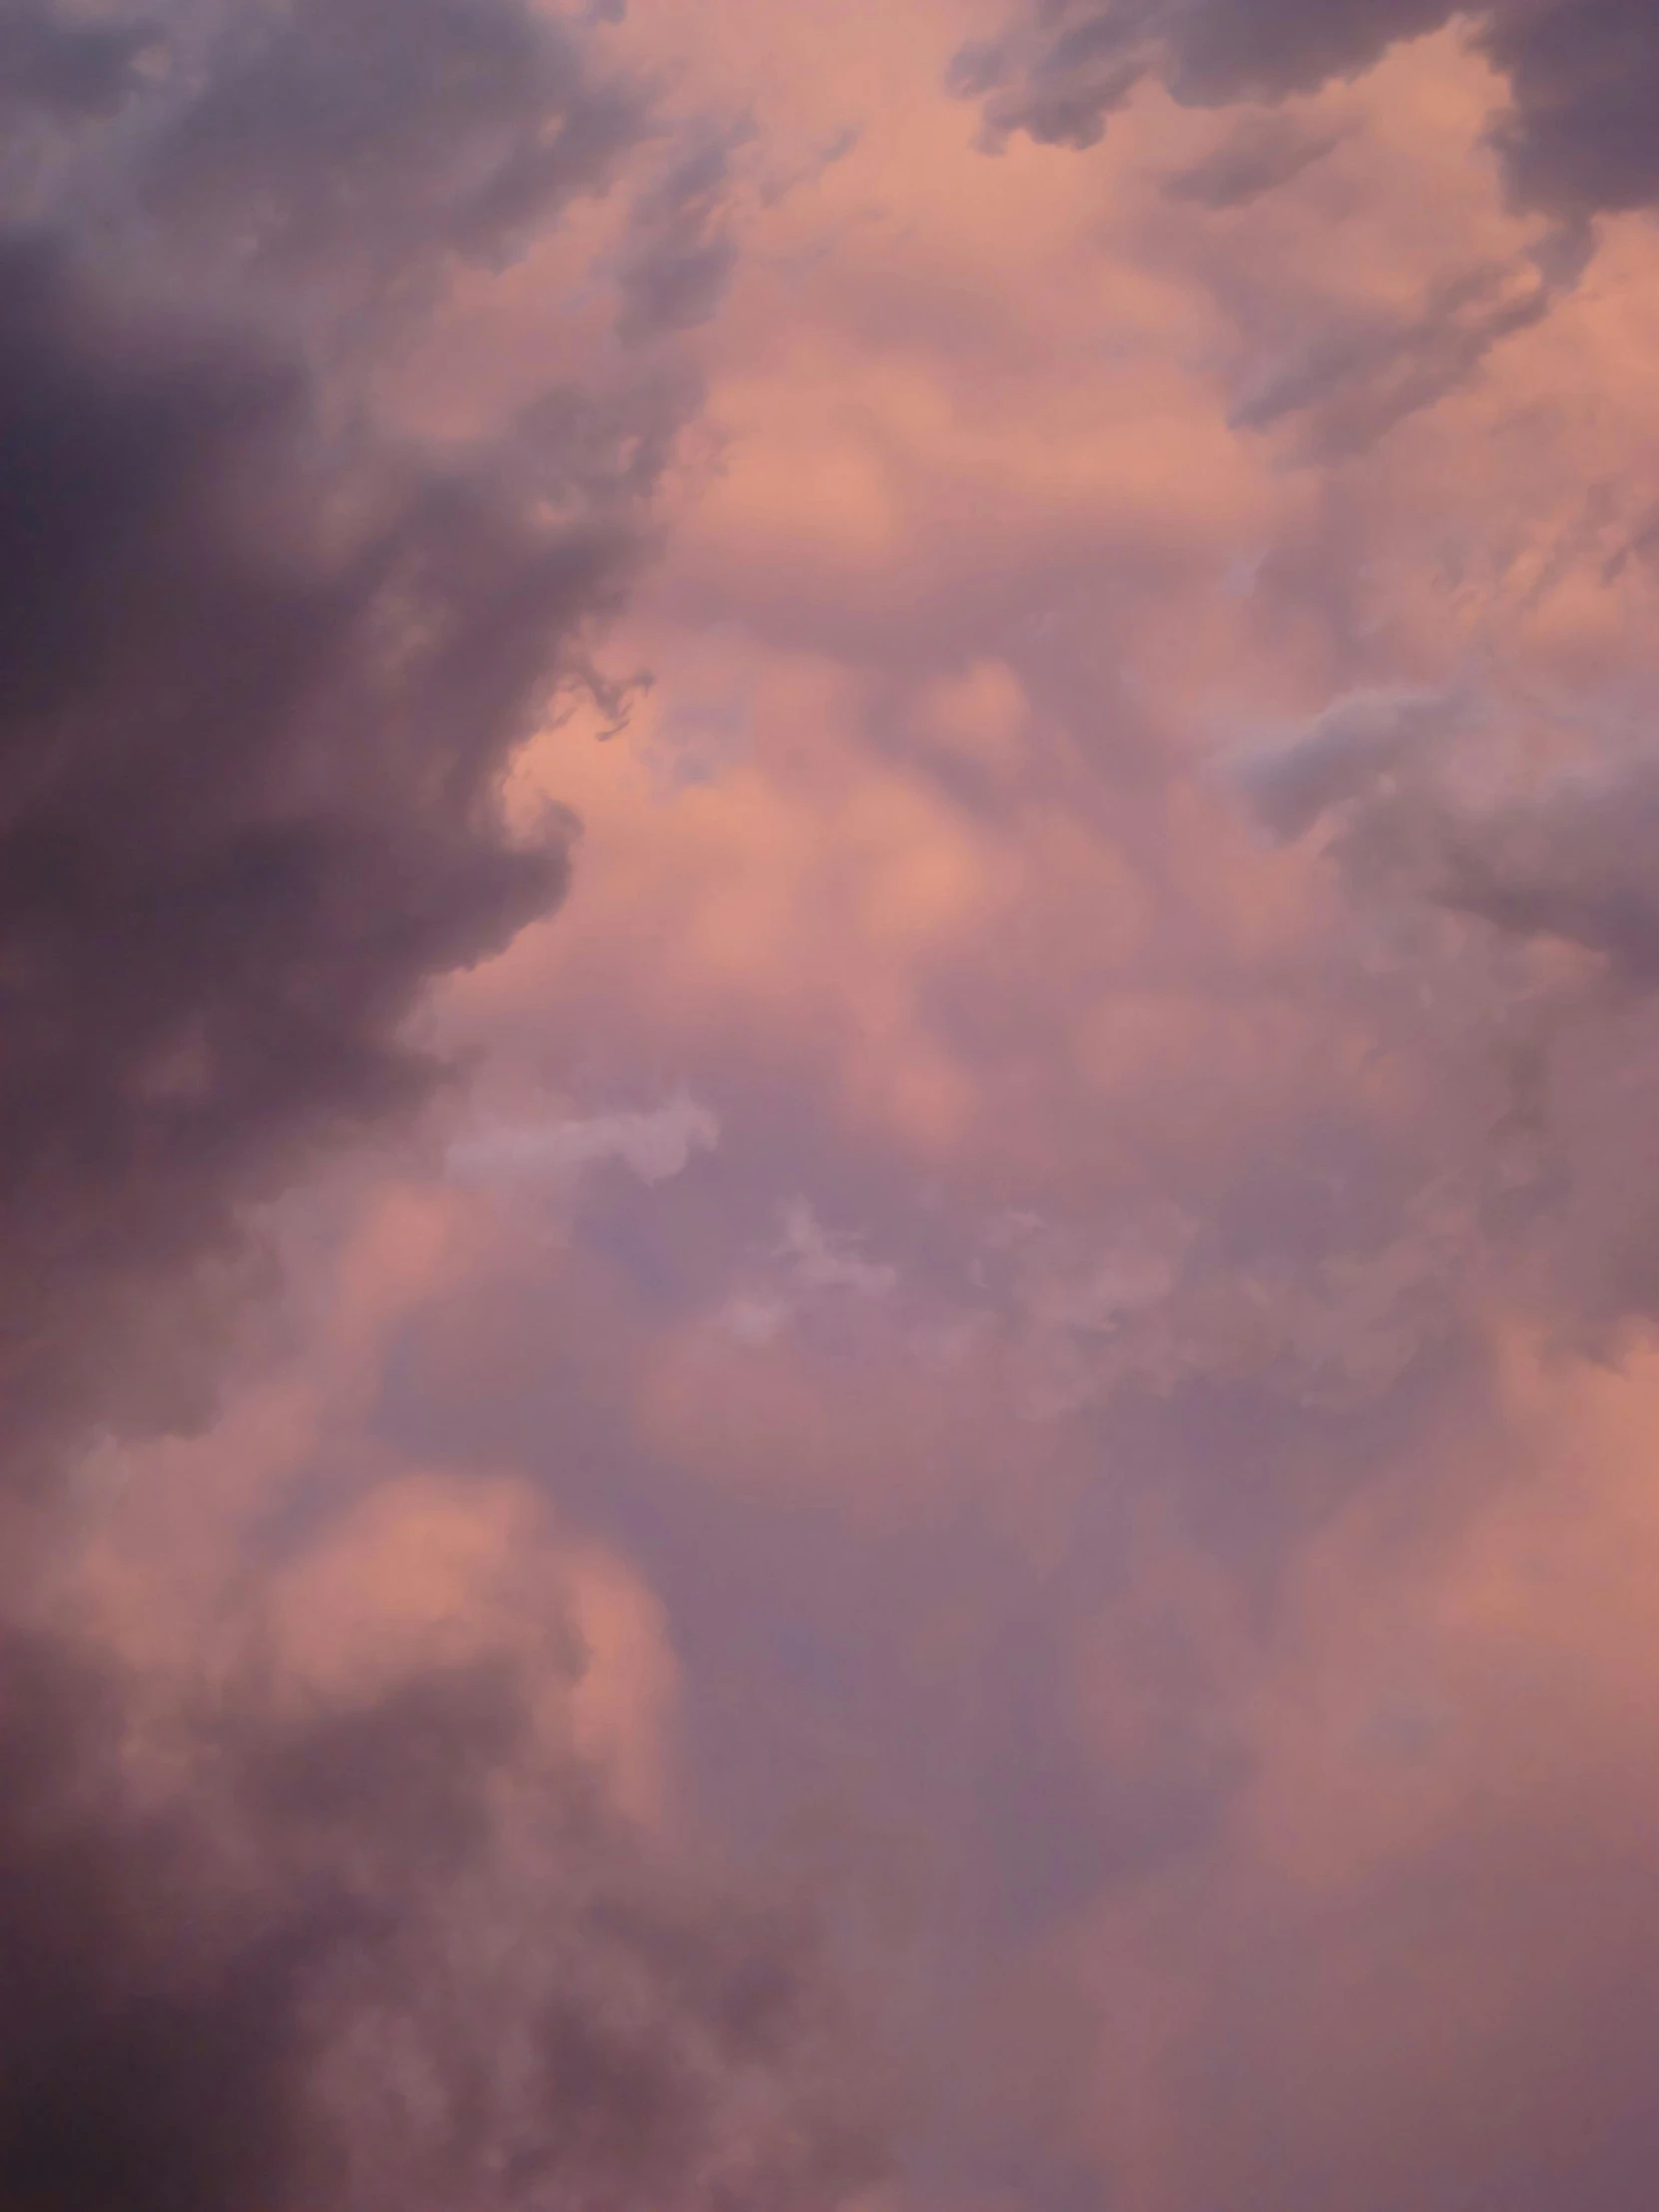 a large jetliner flying through a cloudy sky, an album cover, unsplash, romanticism, soft light 4 k in pink, ☁🌪🌙👩🏾, evening storm, alessio albi